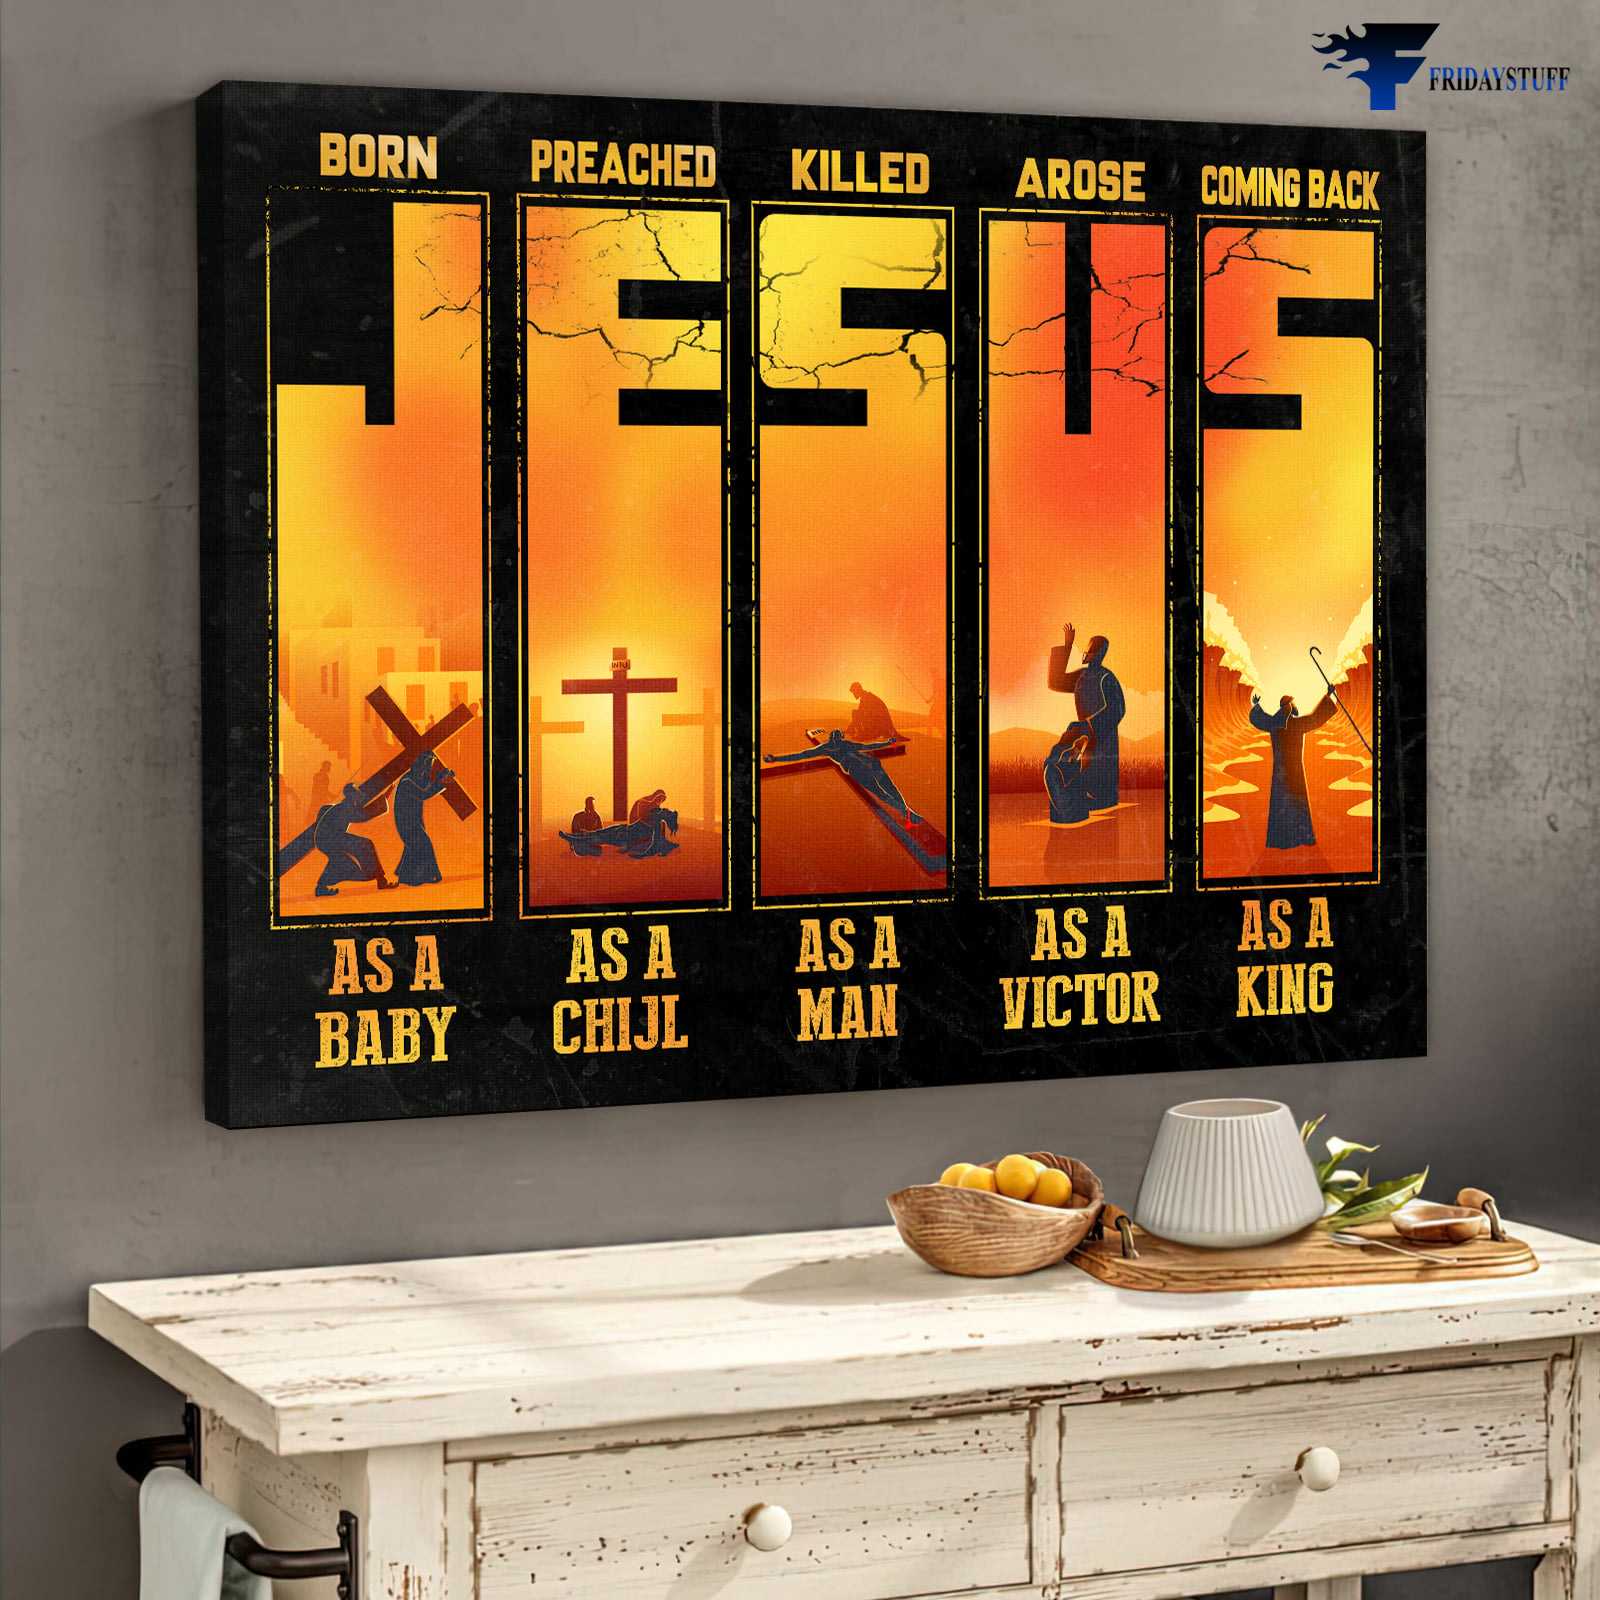 Jesus Poster, God And Lamb, Born As Baby, Preached As A Child, Killed As A Man, Arose As A Victor, Coming Back As A King